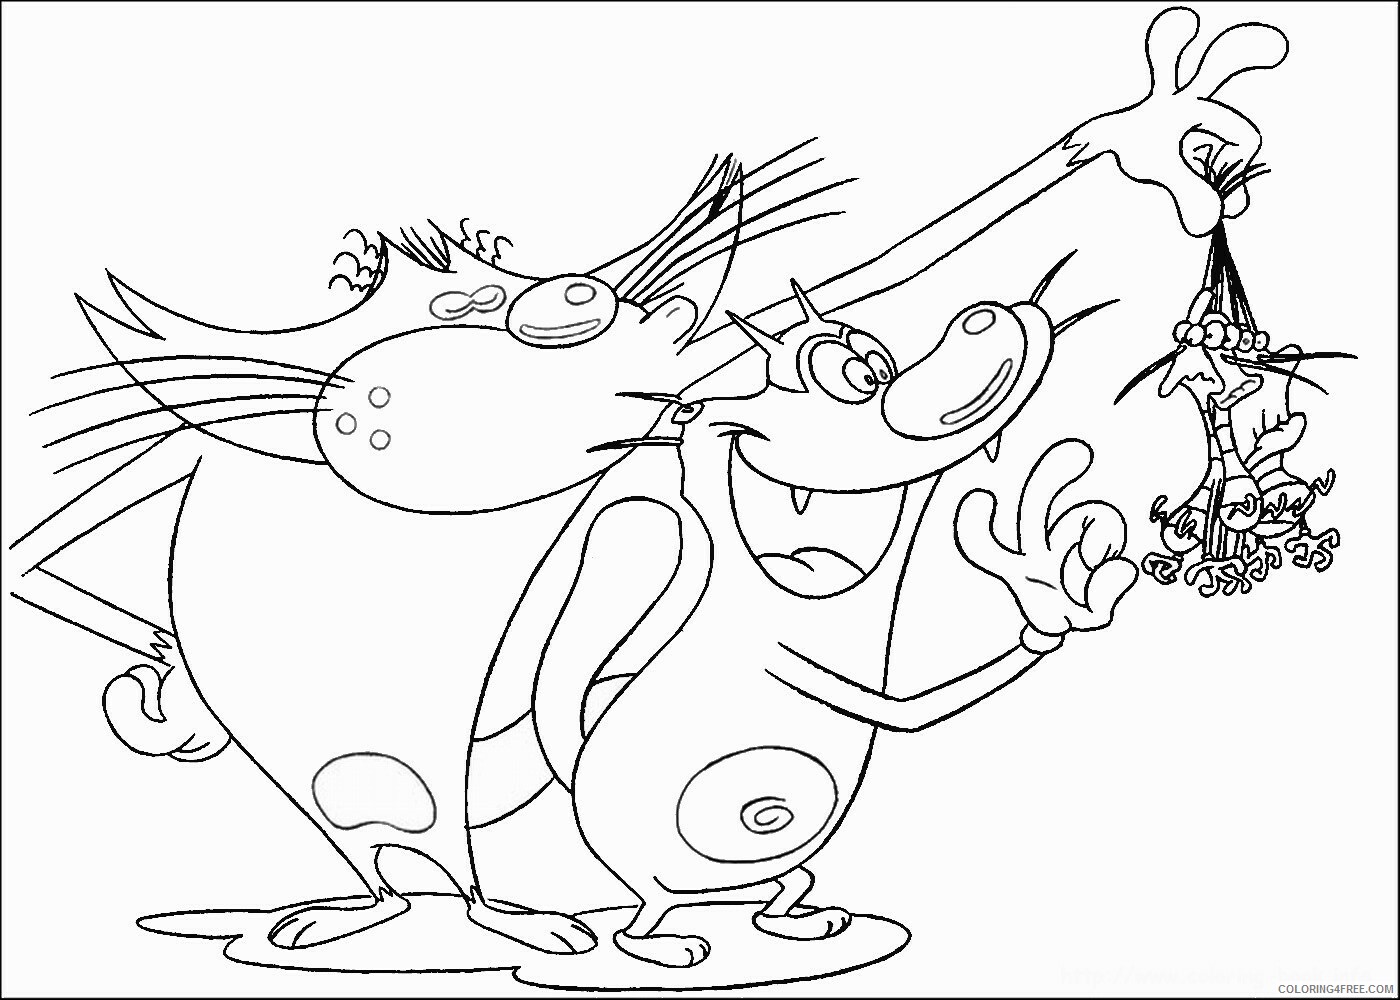 Oggy and the Cockroaches Coloring Pages TV Film Printable 2020 05593 Coloring4free